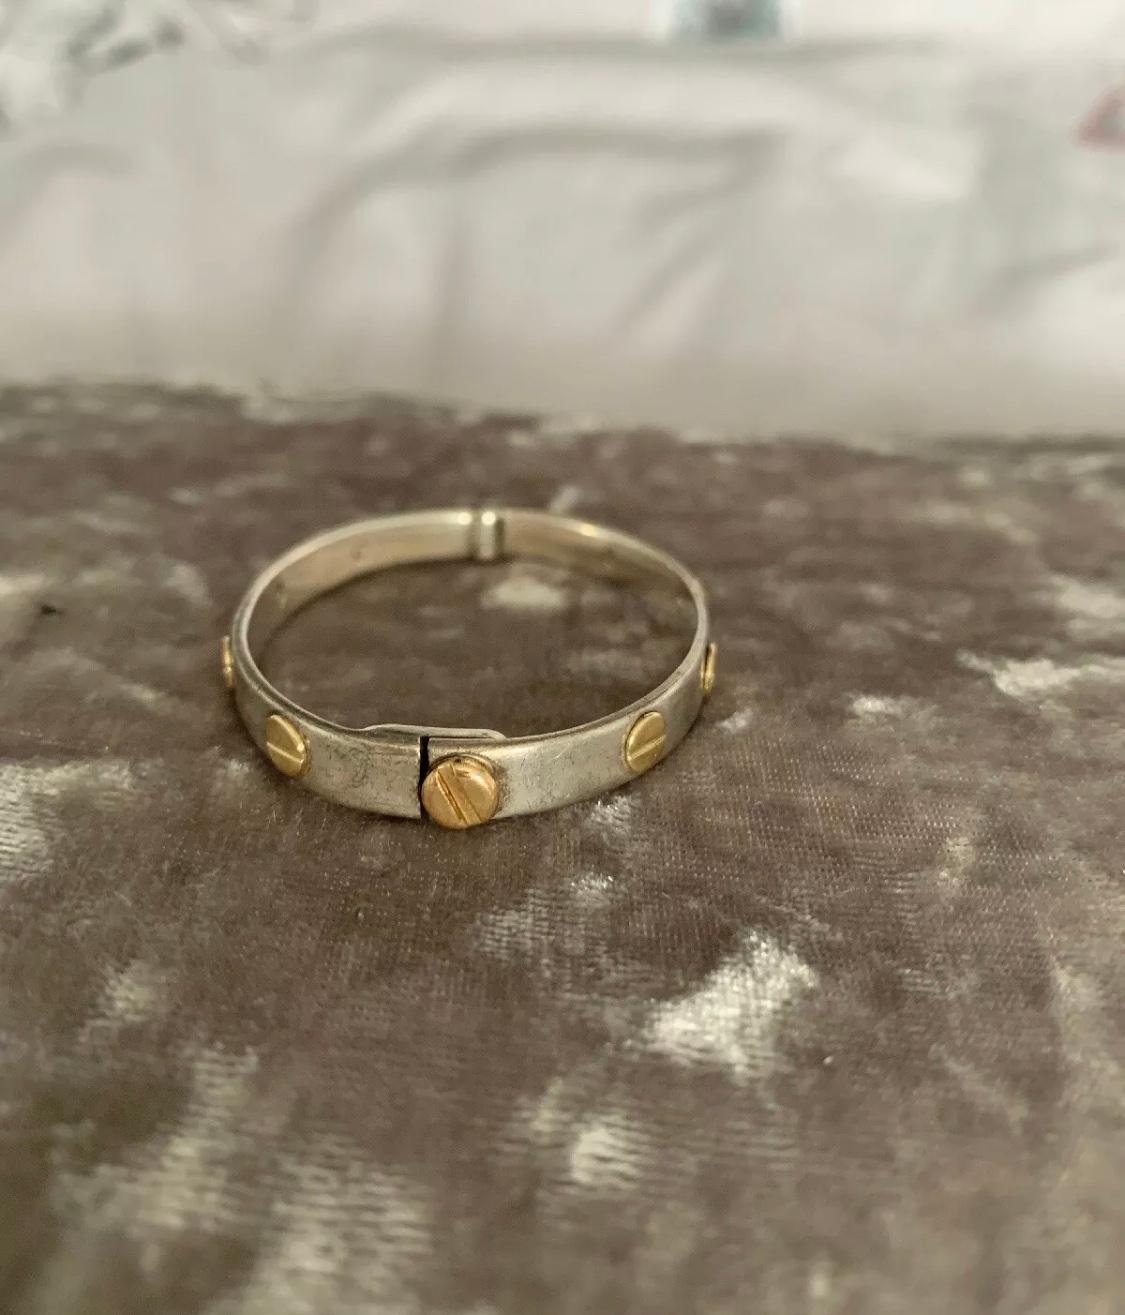 Baby cartier style screw bangle in SE2 